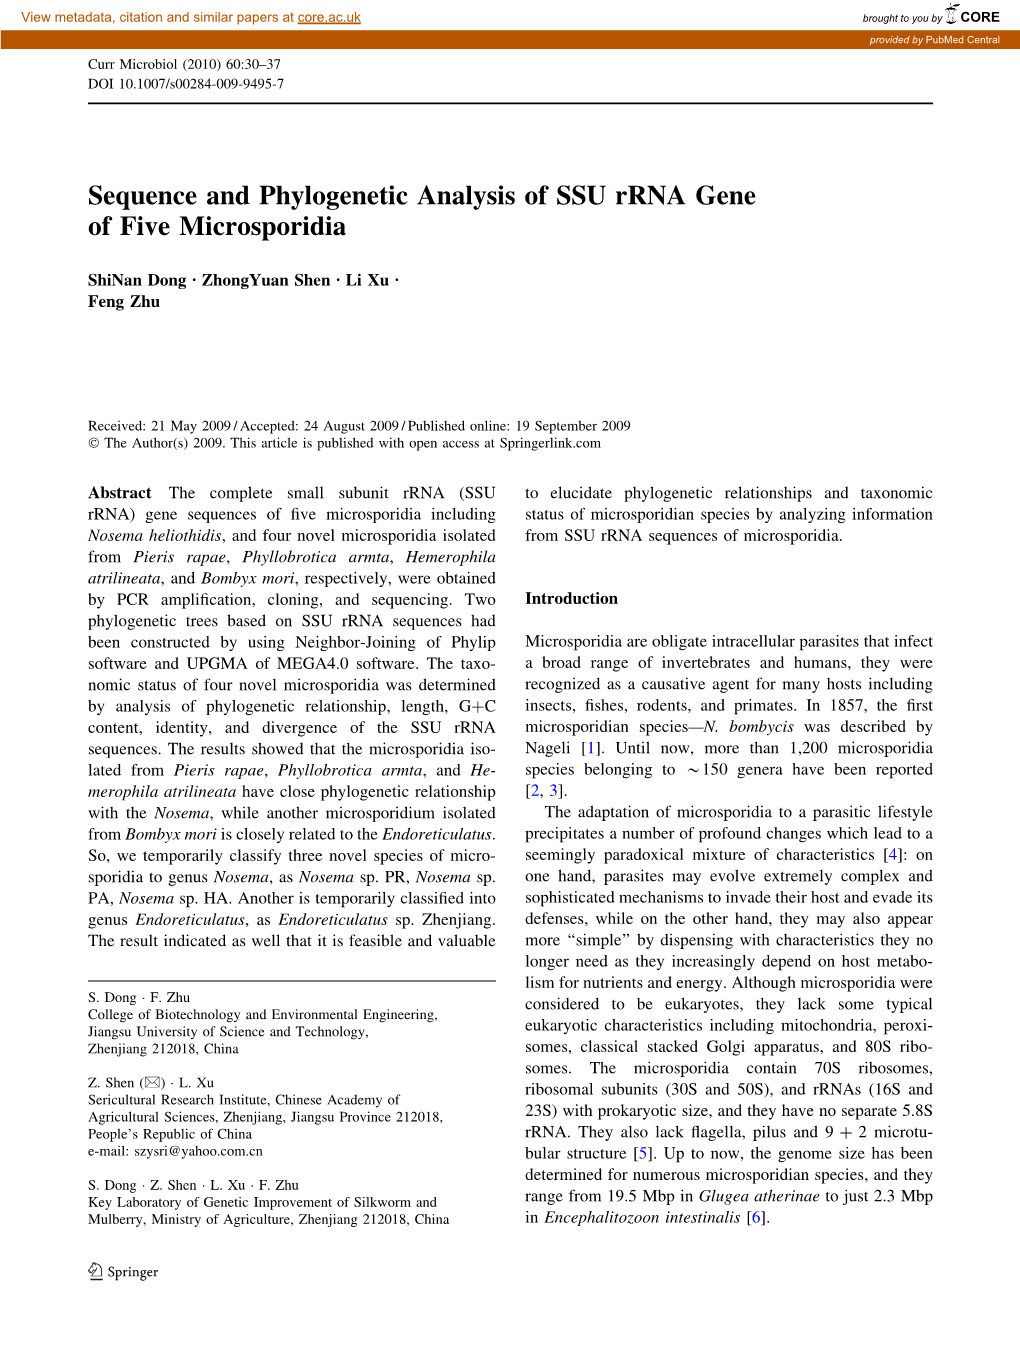 Sequence and Phylogenetic Analysis of SSU Rrna Gene of Five Microsporidia